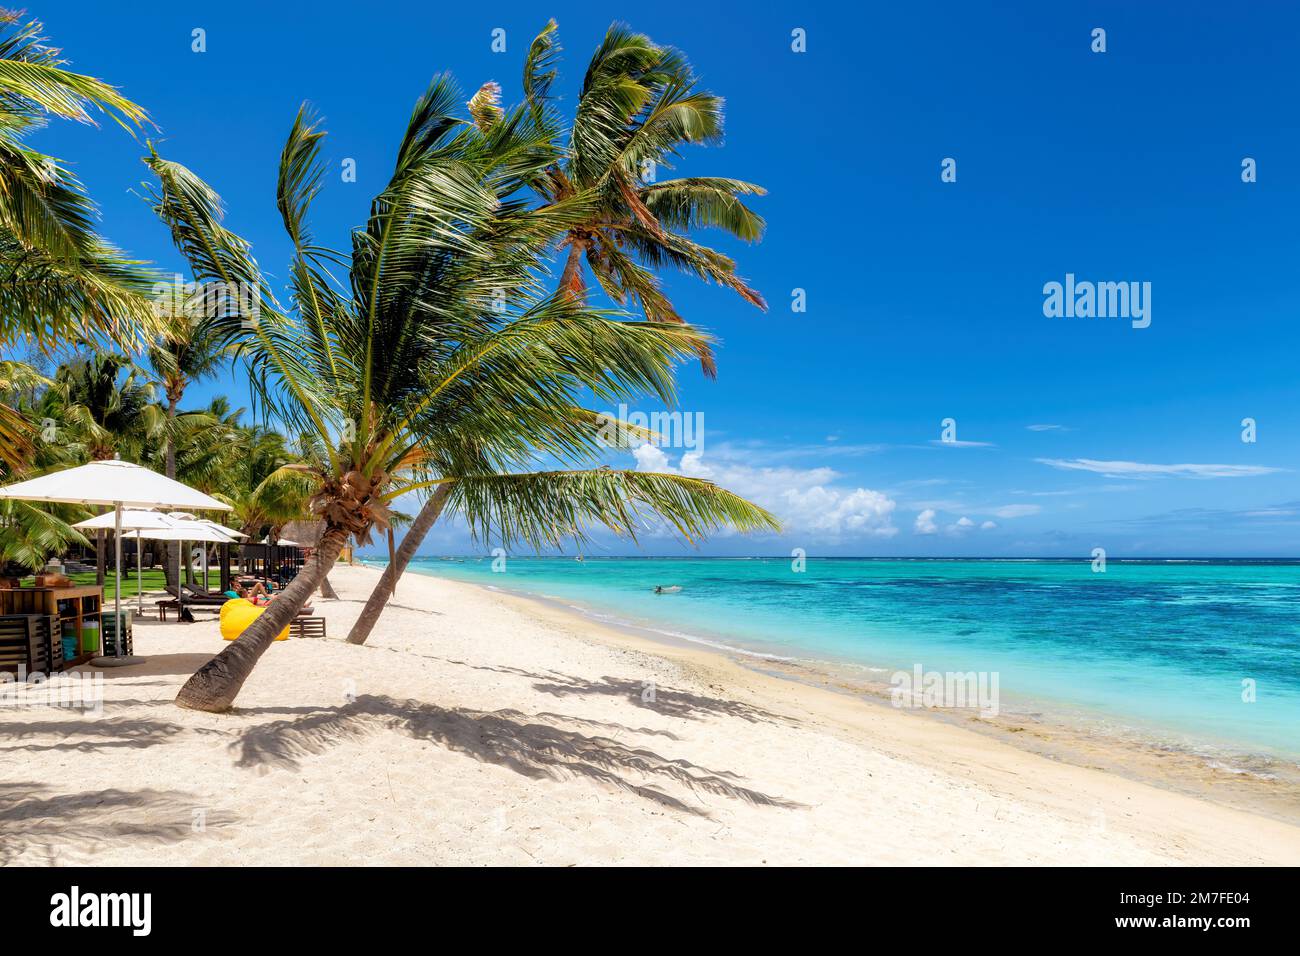 Palm trees on Paradise beach in tropical resort in Mauritius island. Stock Photo